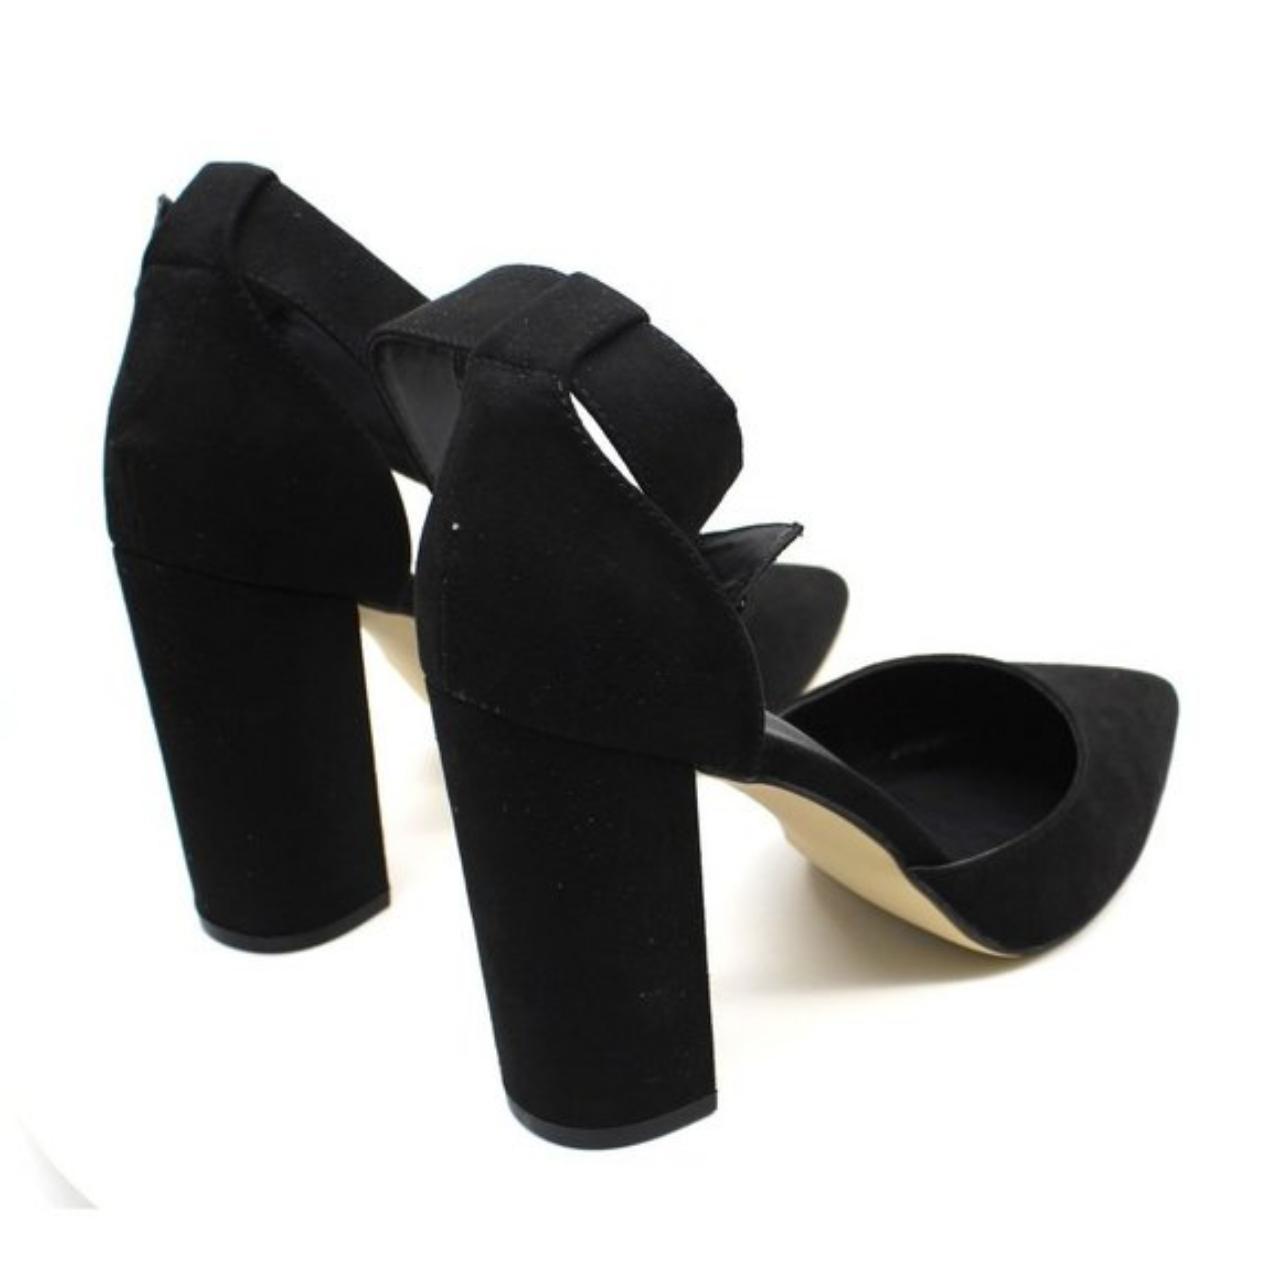 Product Image 3 - Madden Girl Saxon Two-Piece Pumps

A